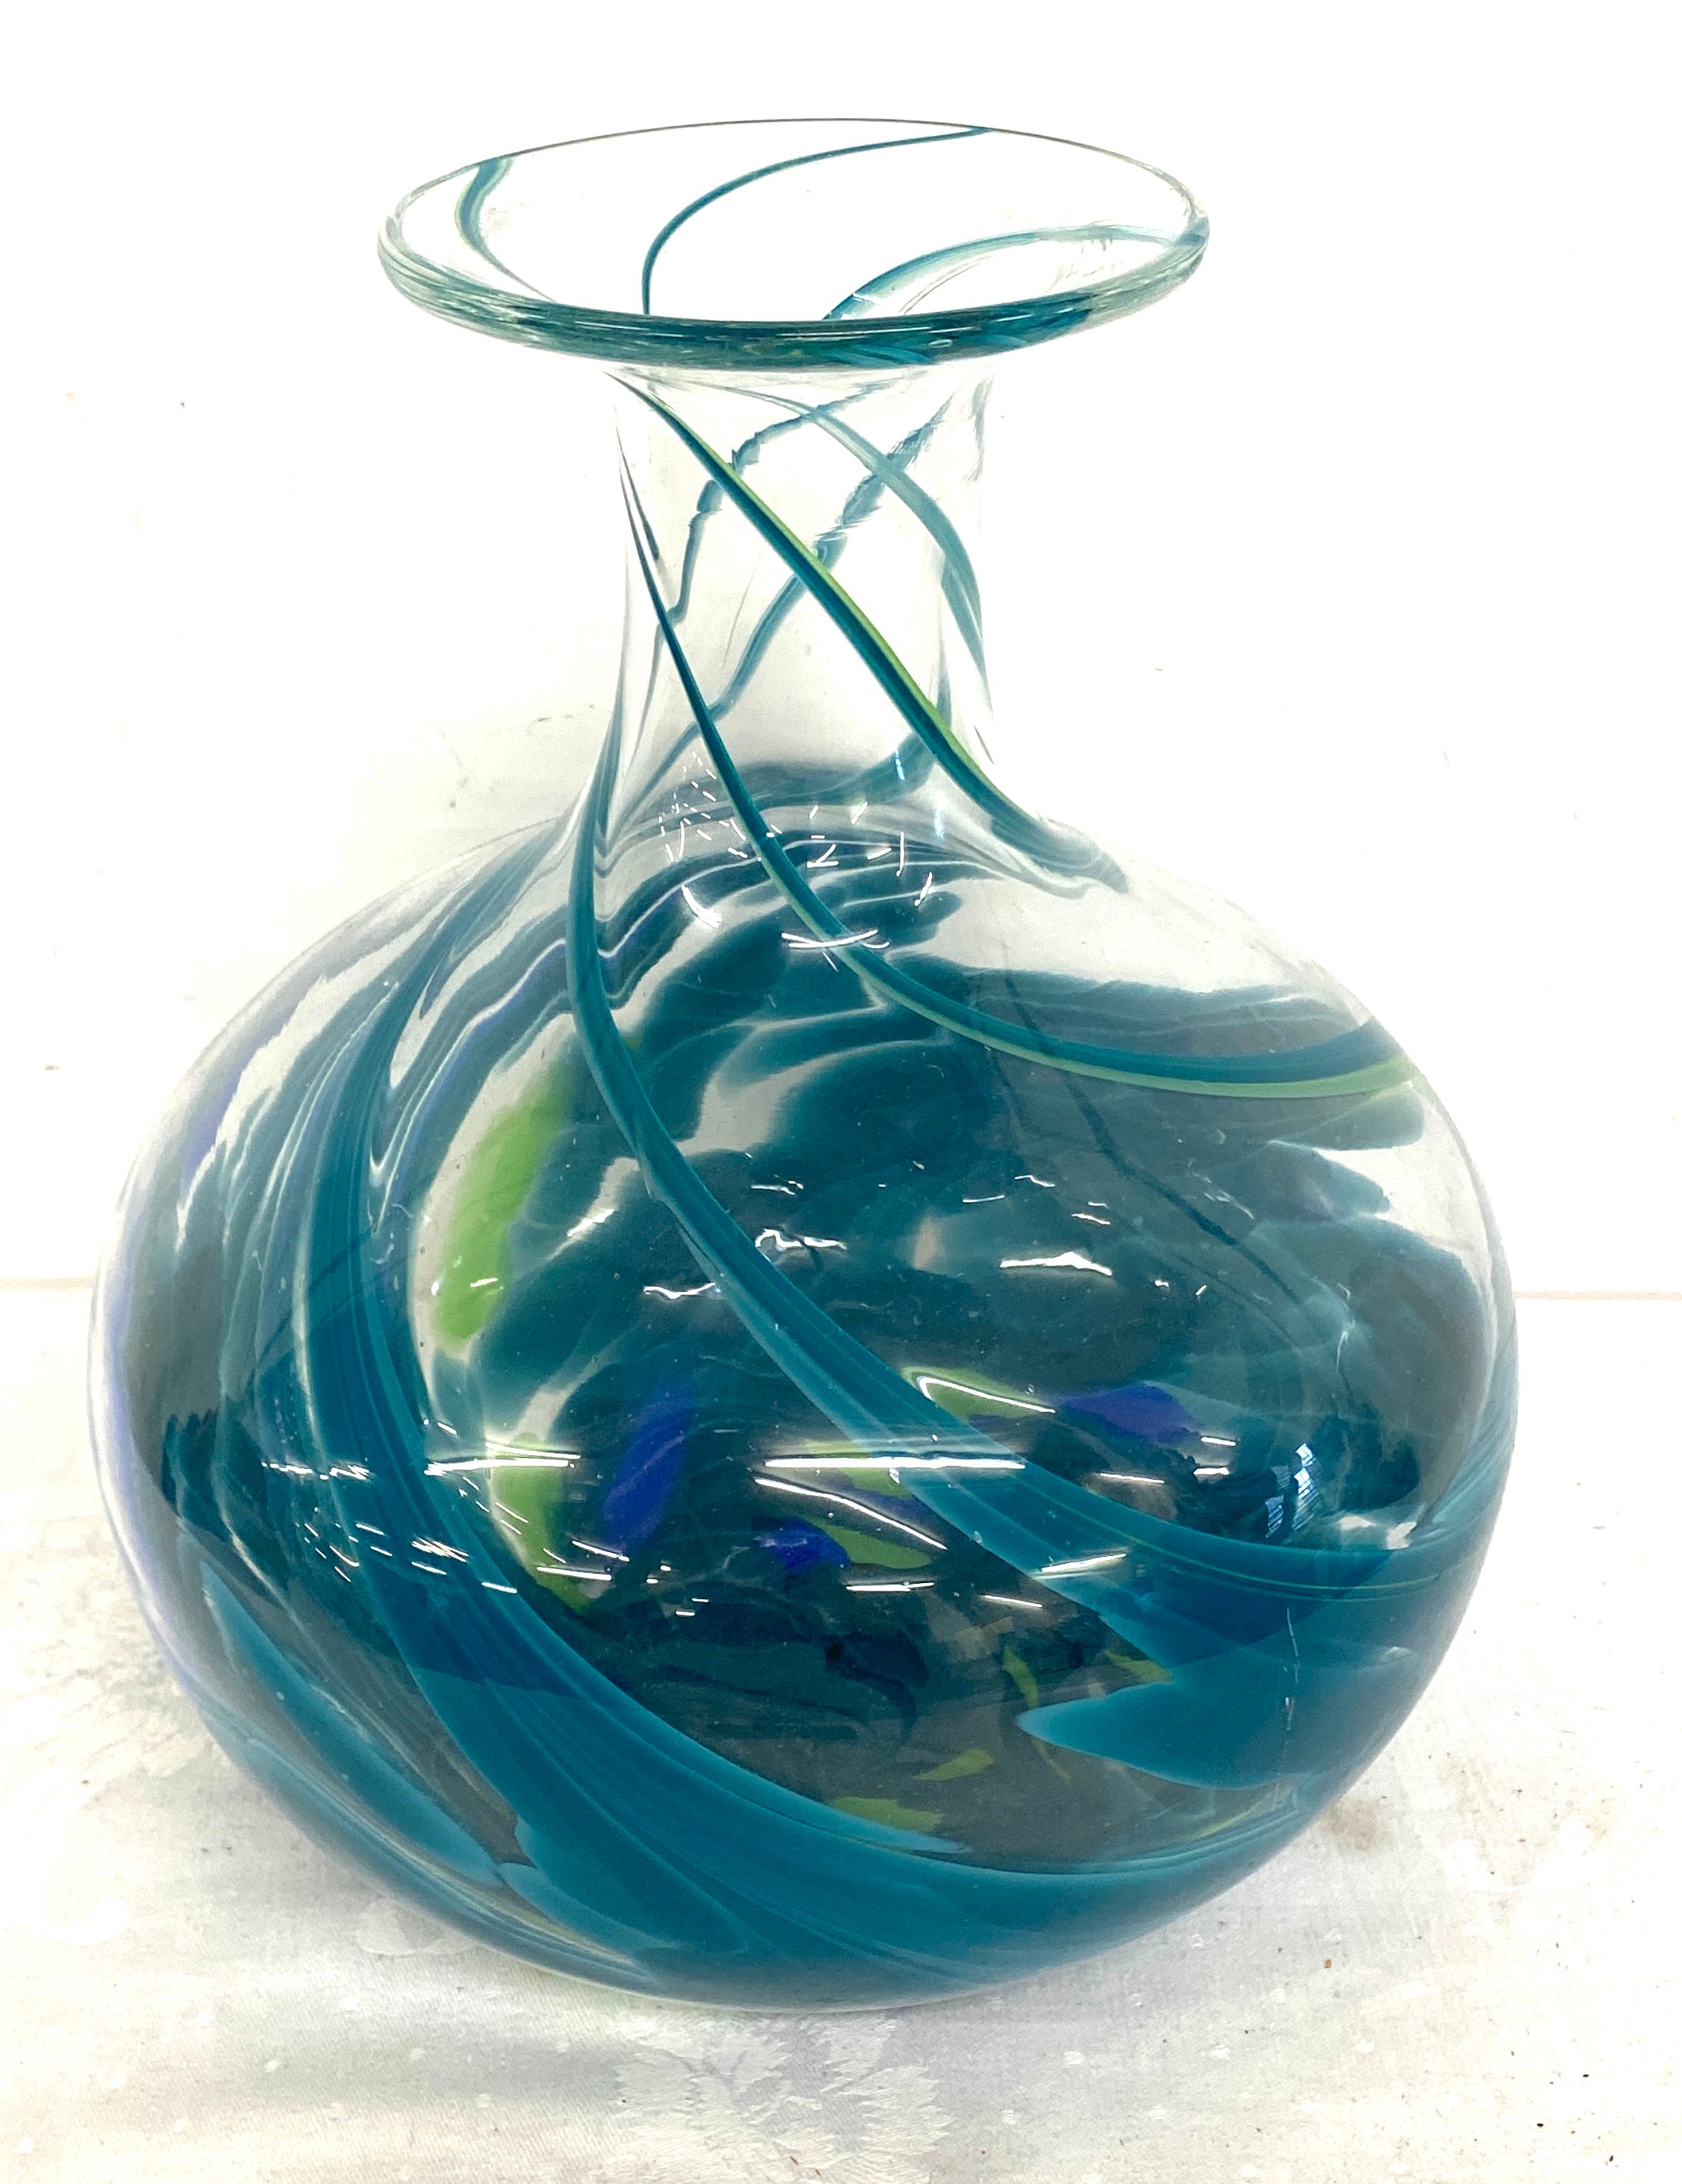 Decorative swirl glass vase, approximate height 12 inches - Image 2 of 5